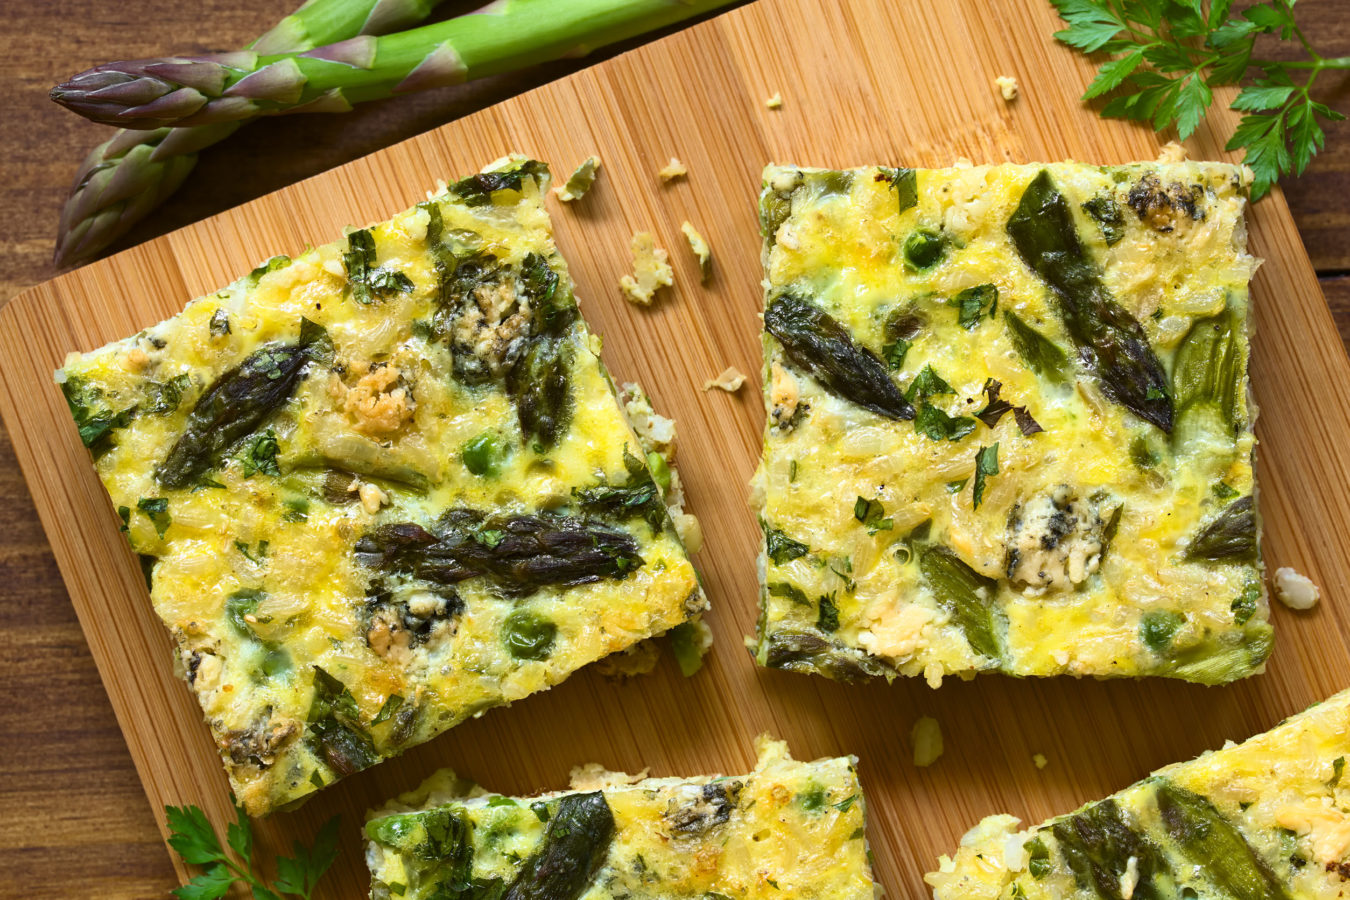 Frittata made of eggs, green asparagus, pea, blue cheese, parsley and brown rice, photographed overhead on wooden board with natural light